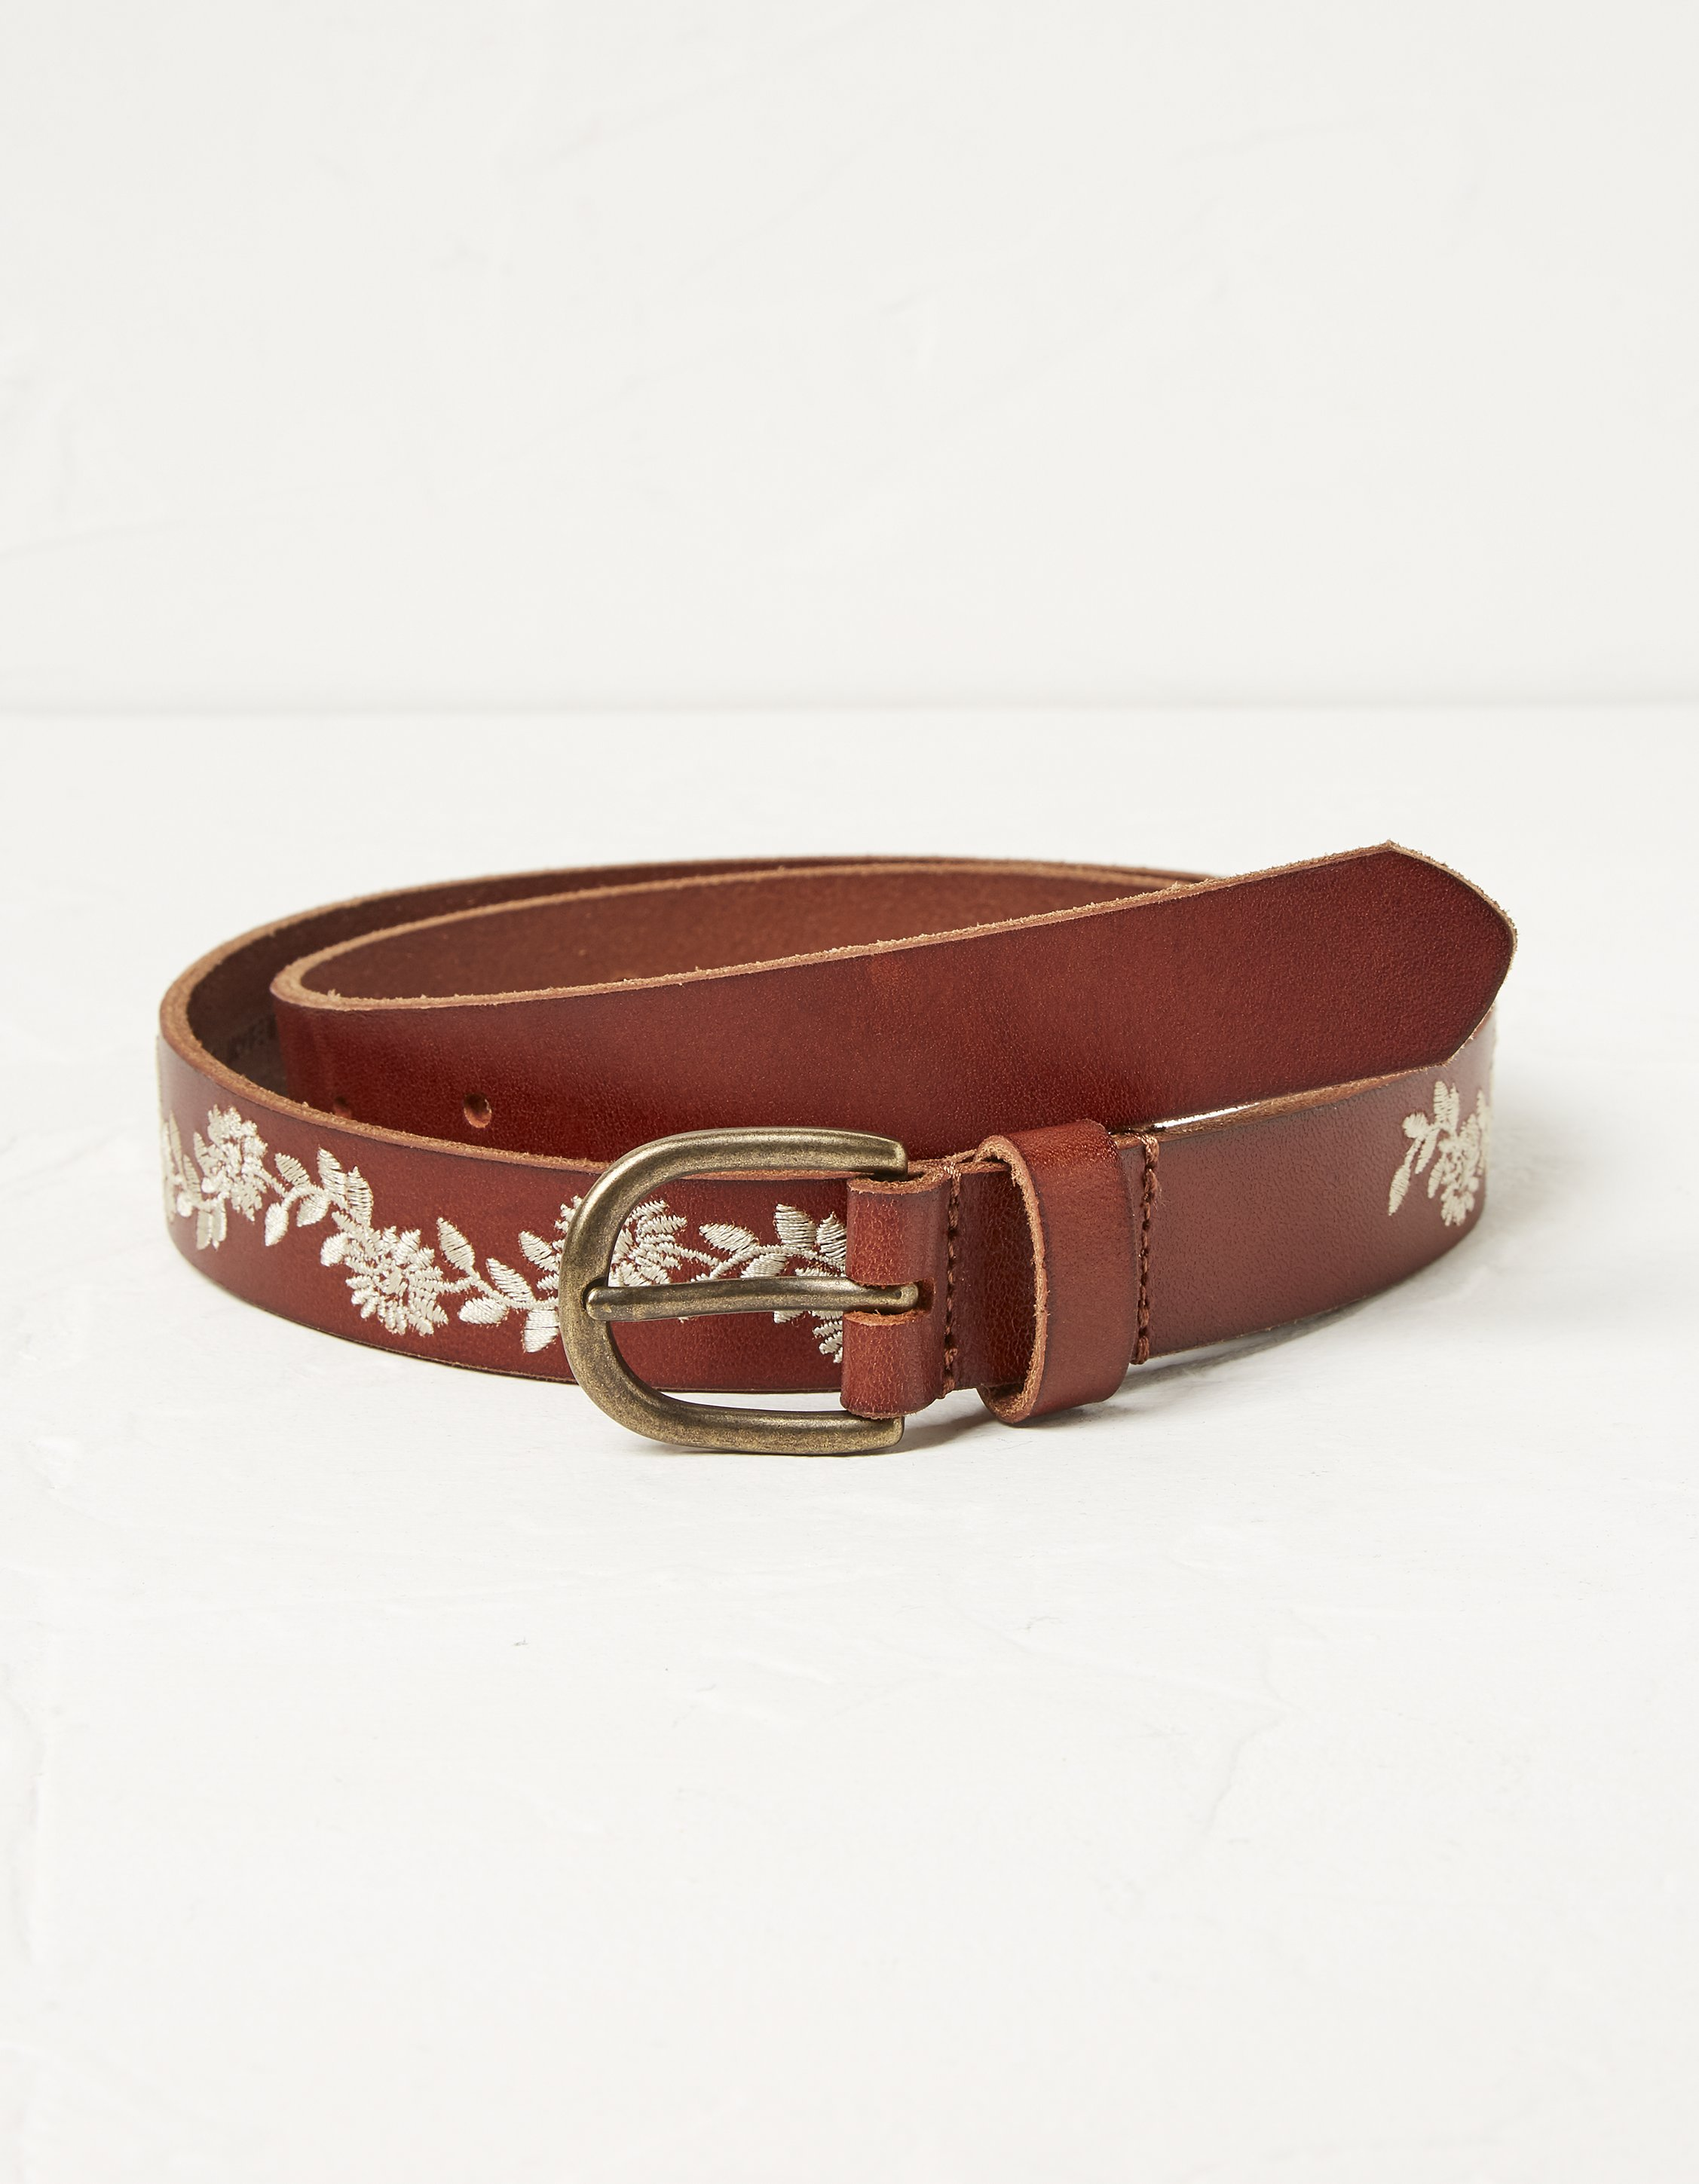 Fashion Forward: Elevate Your Look with Belts for Women